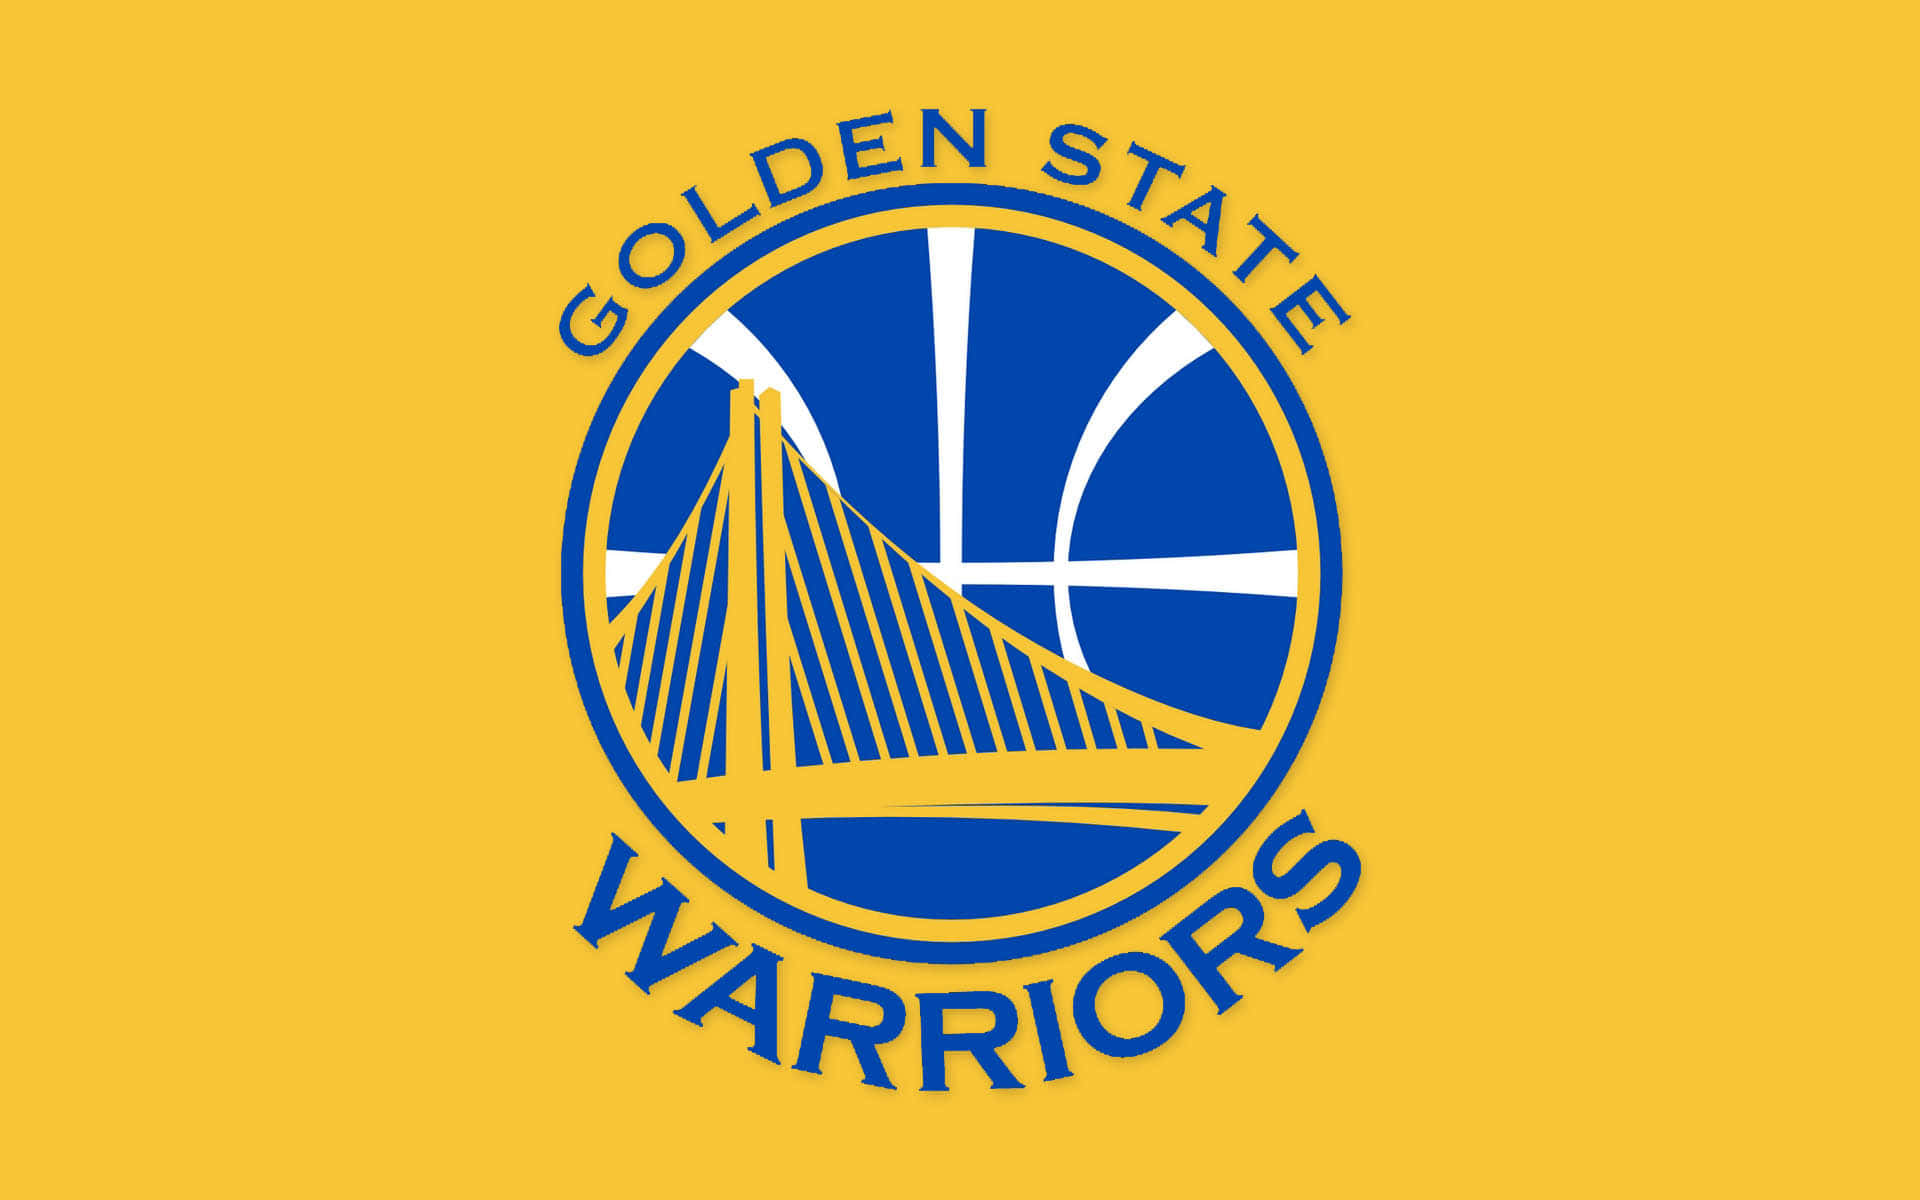 Golden State, in, numbers, strength, warriors, HD phone wallpaper